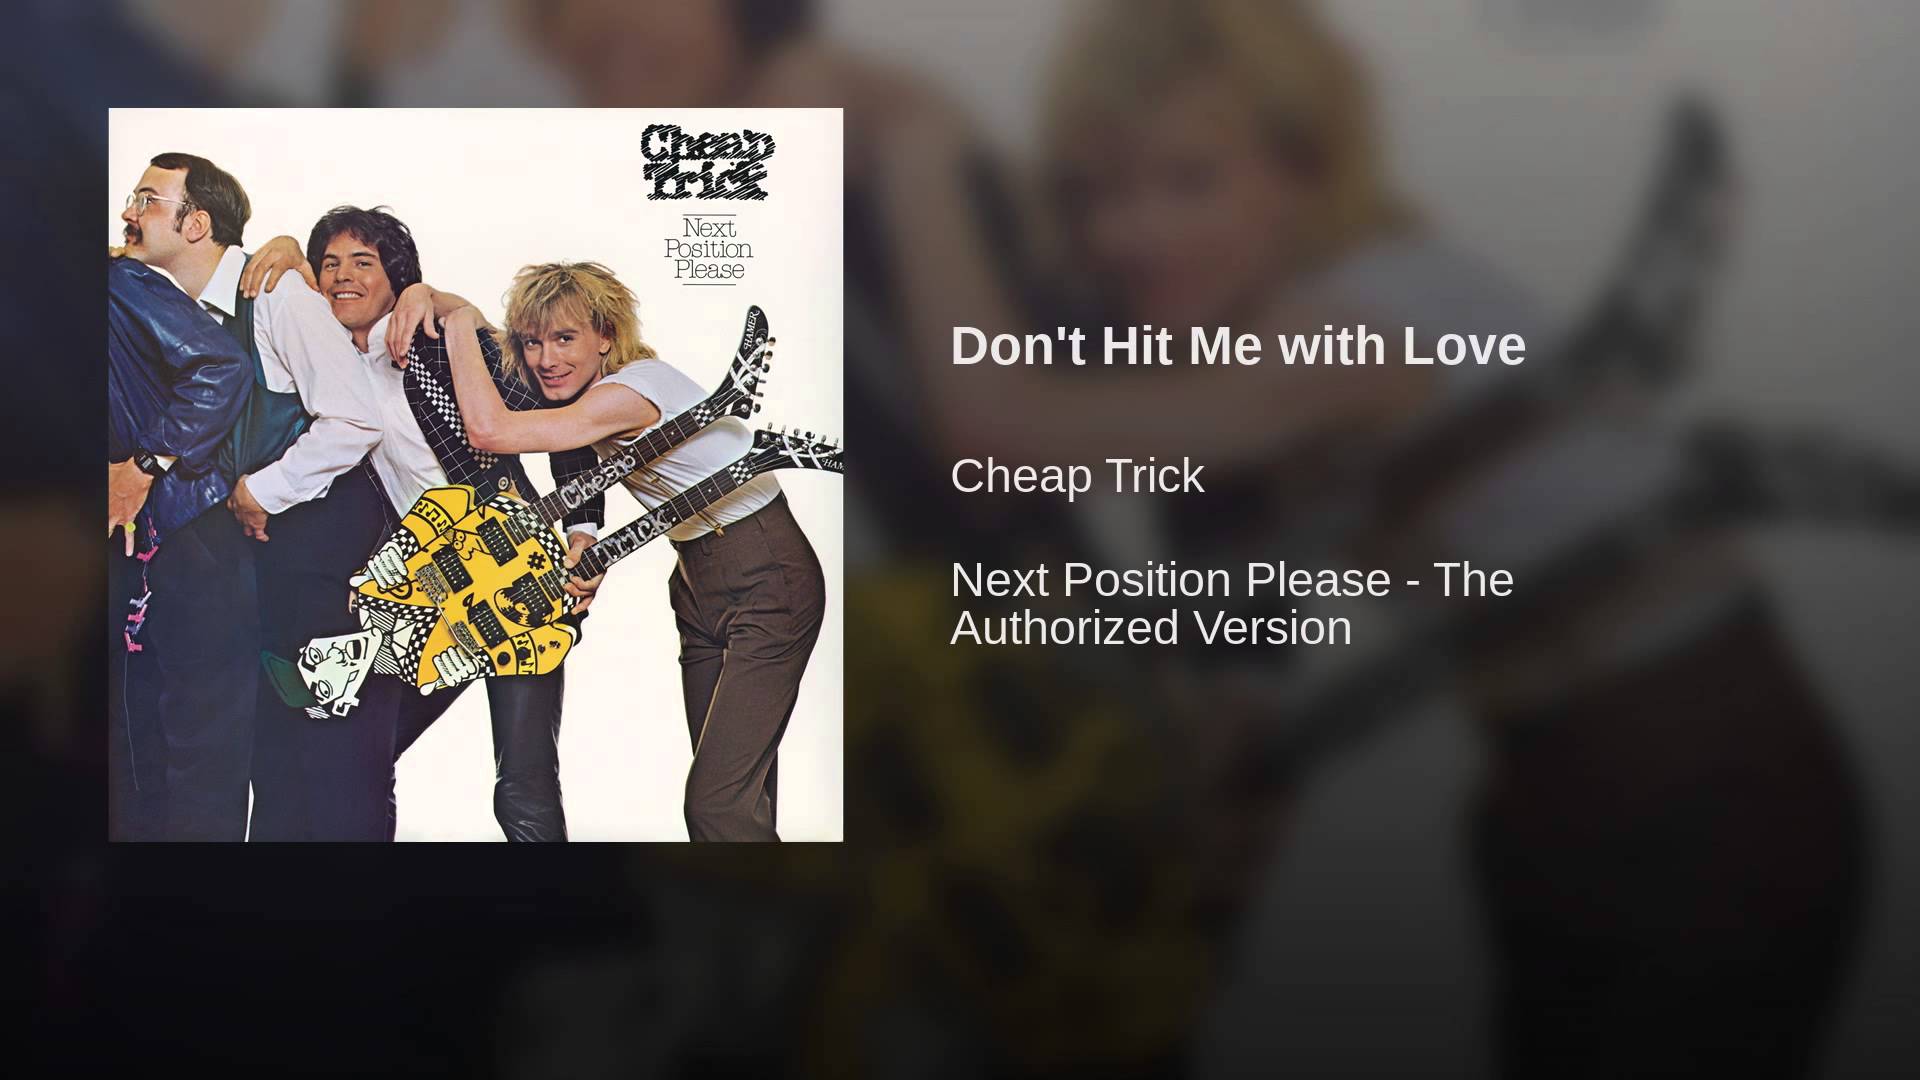 Don't Hit Me with Love - YouTube